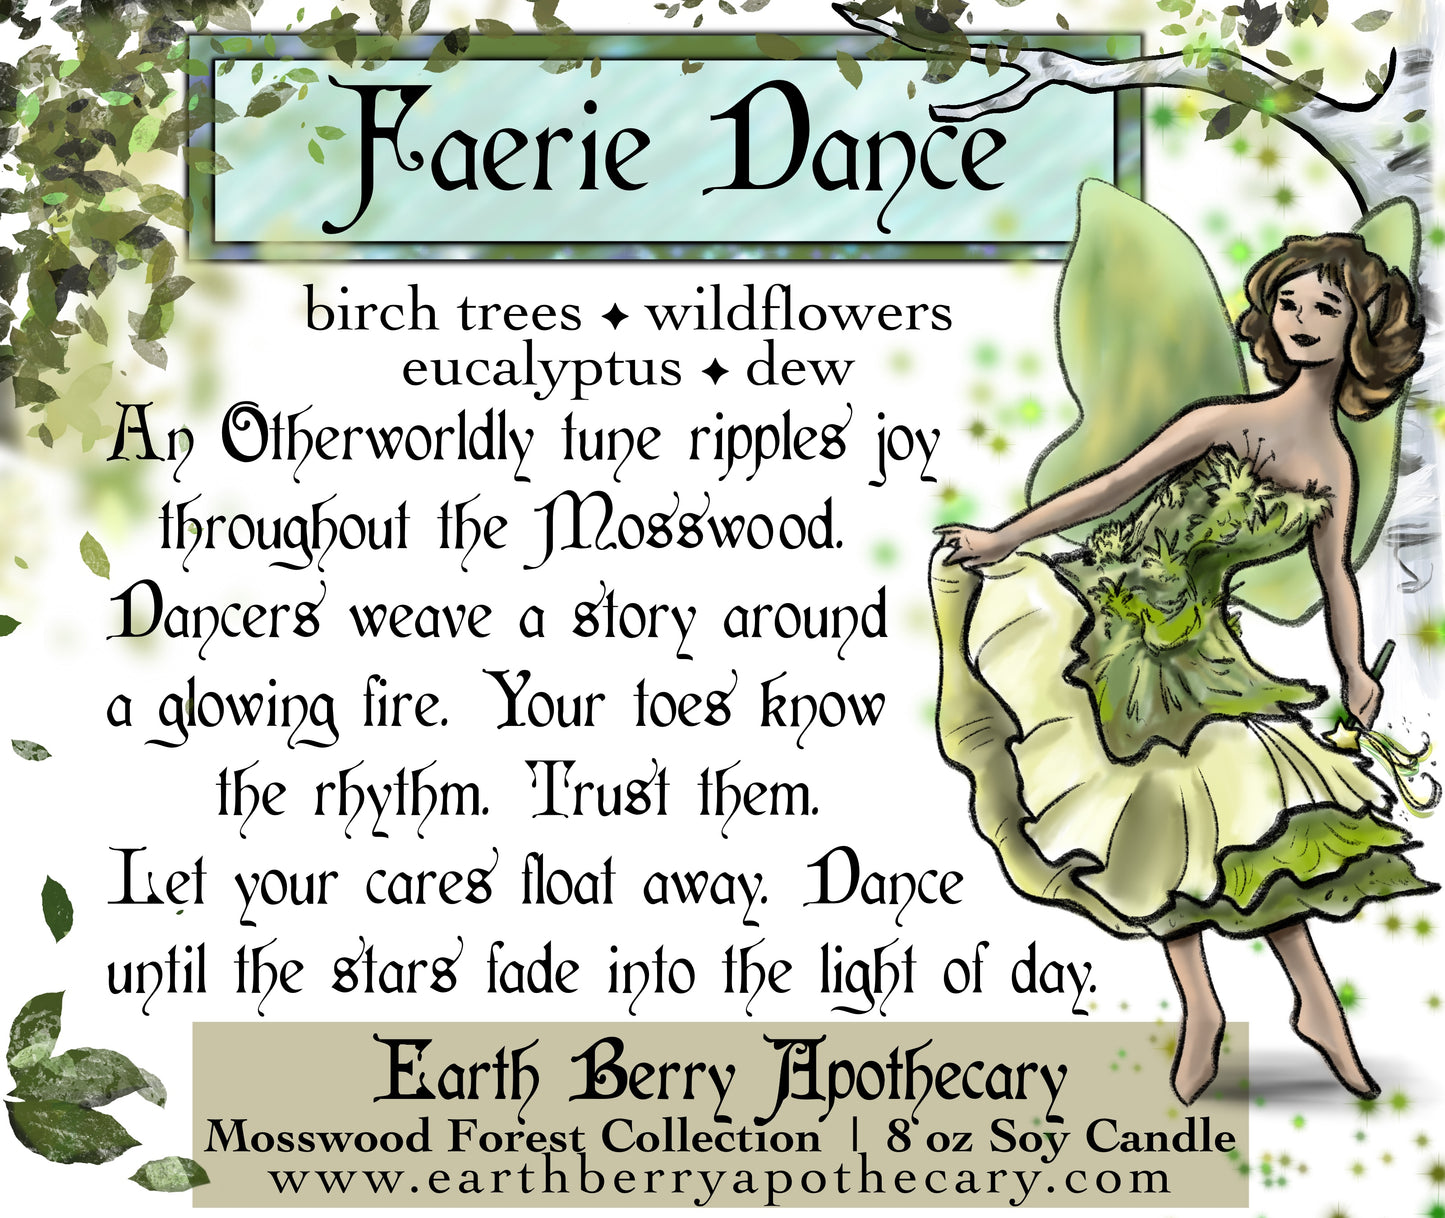 Faerie dance soy candle with birch and wildflower scent. Also fairy dance.